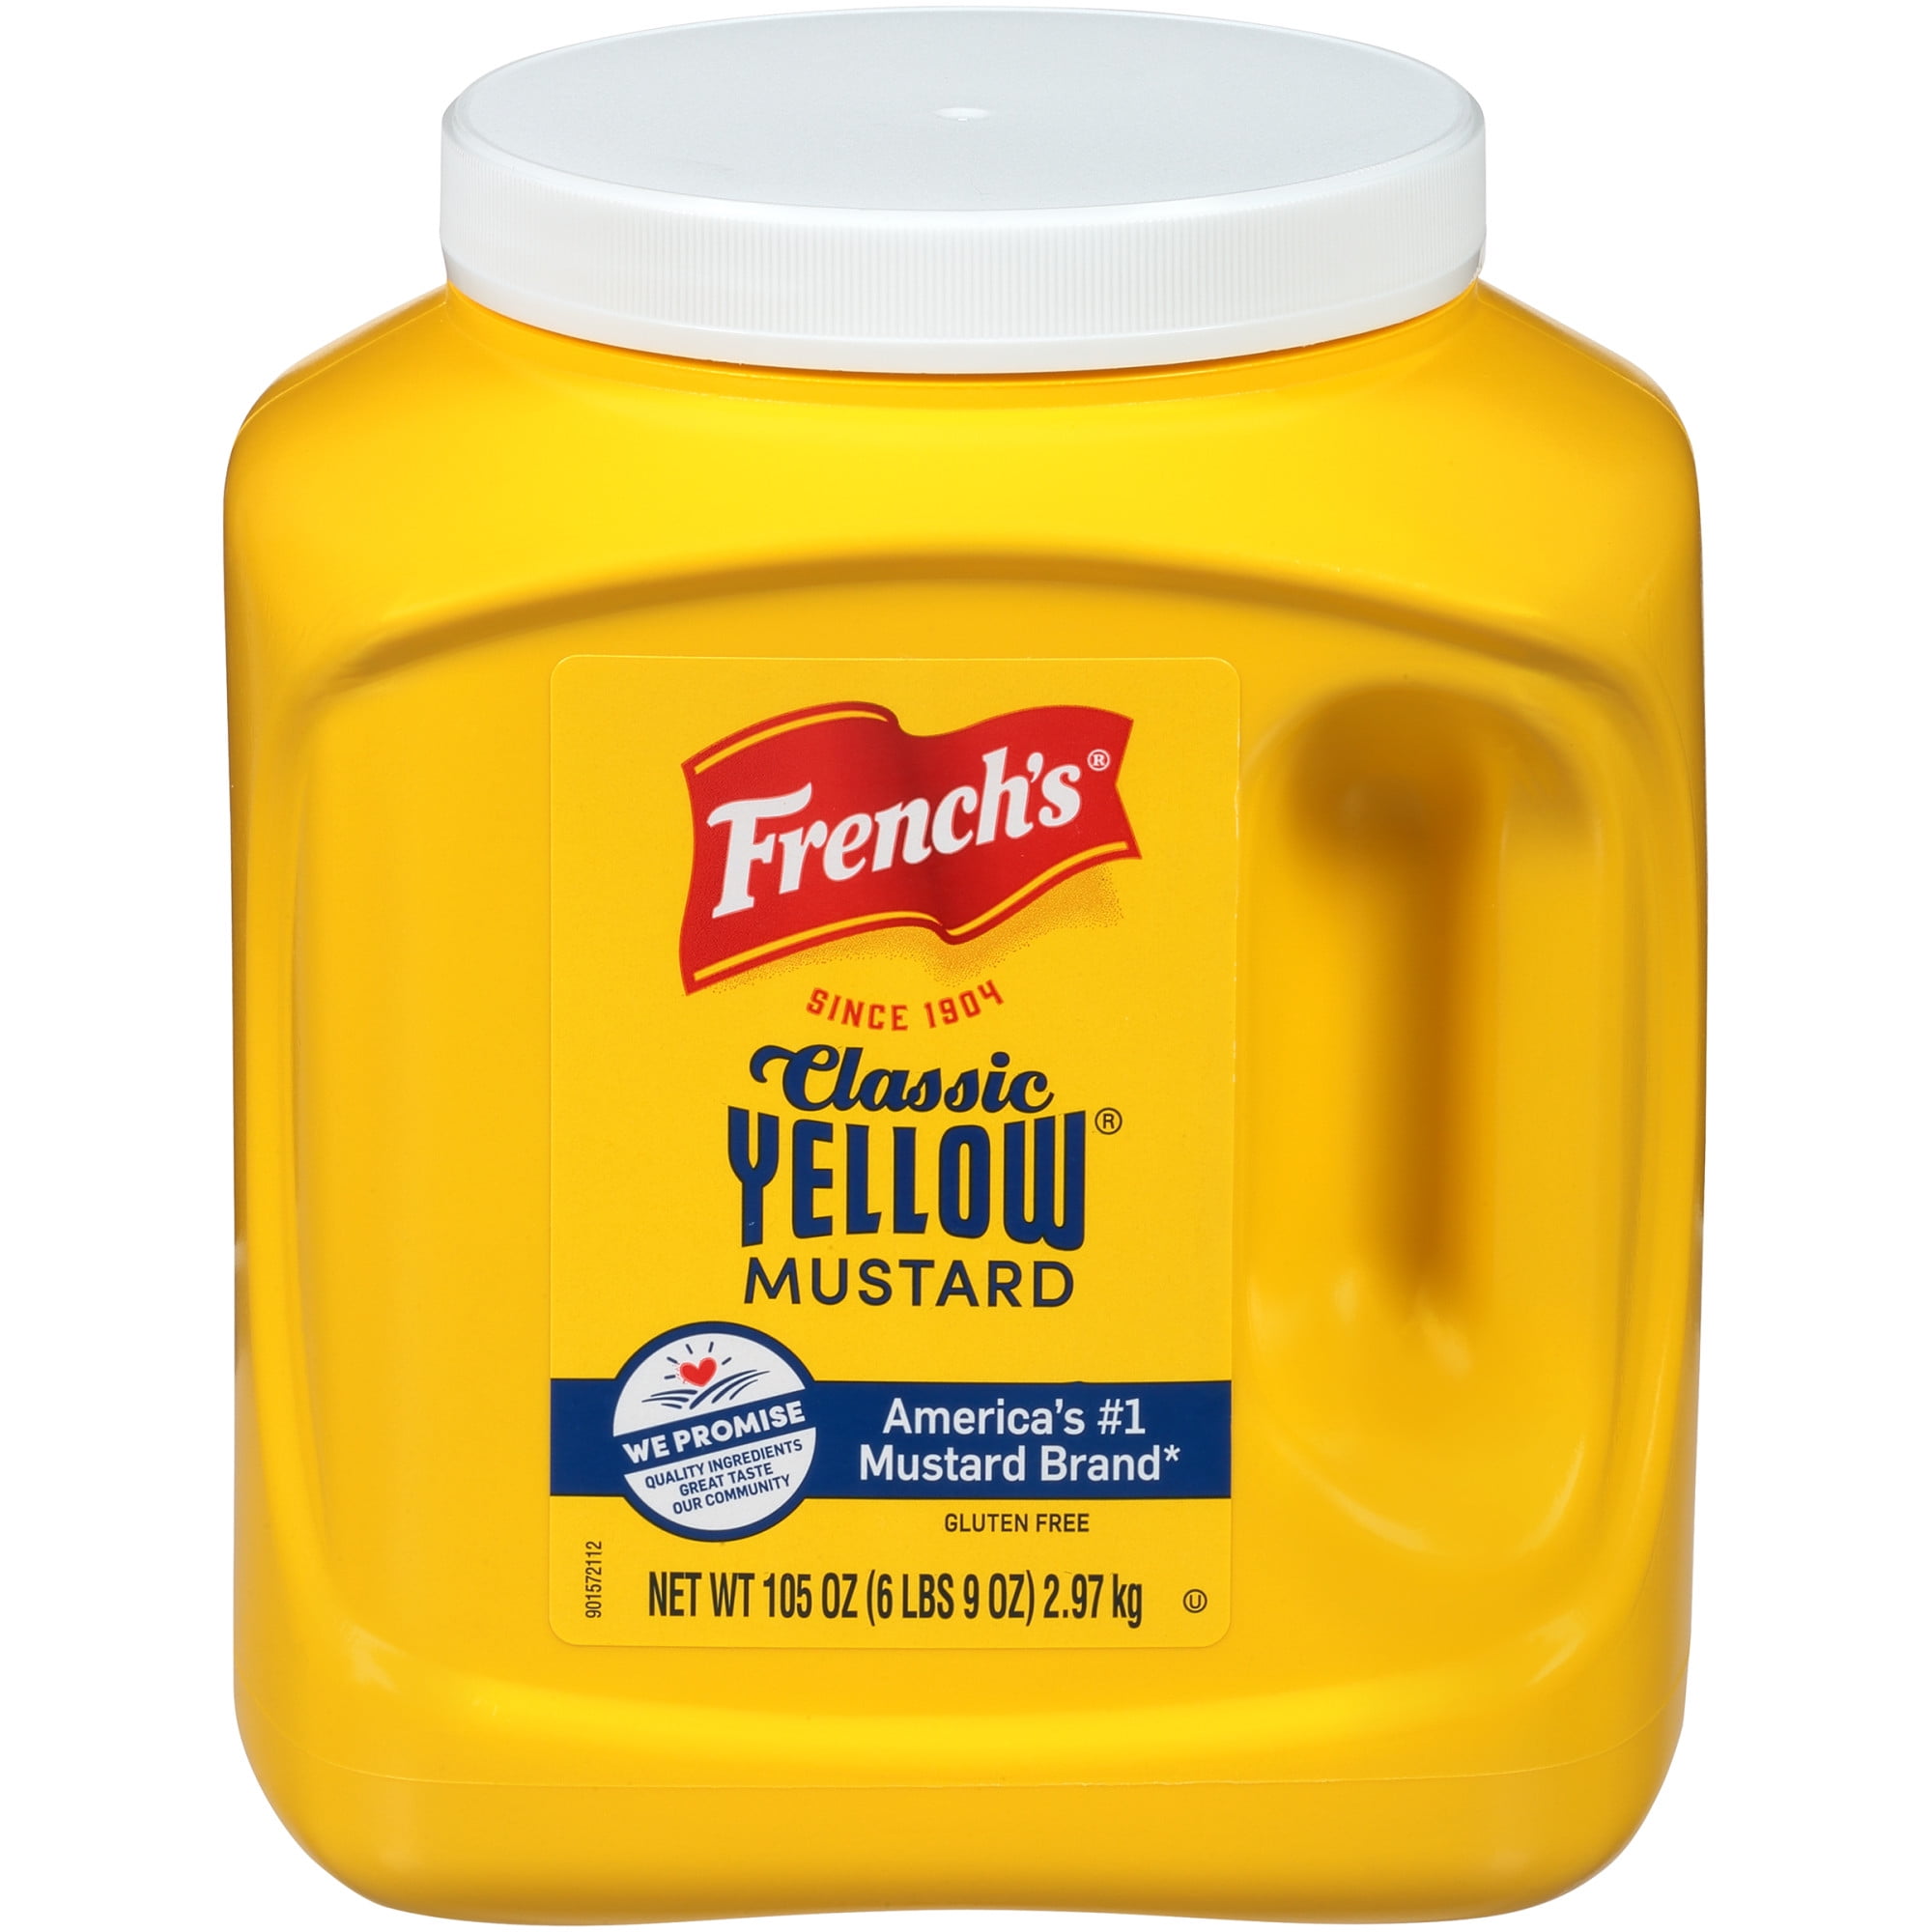 French's Classic Yellow Mustard, 105 oz Mustards - image 1 of 12